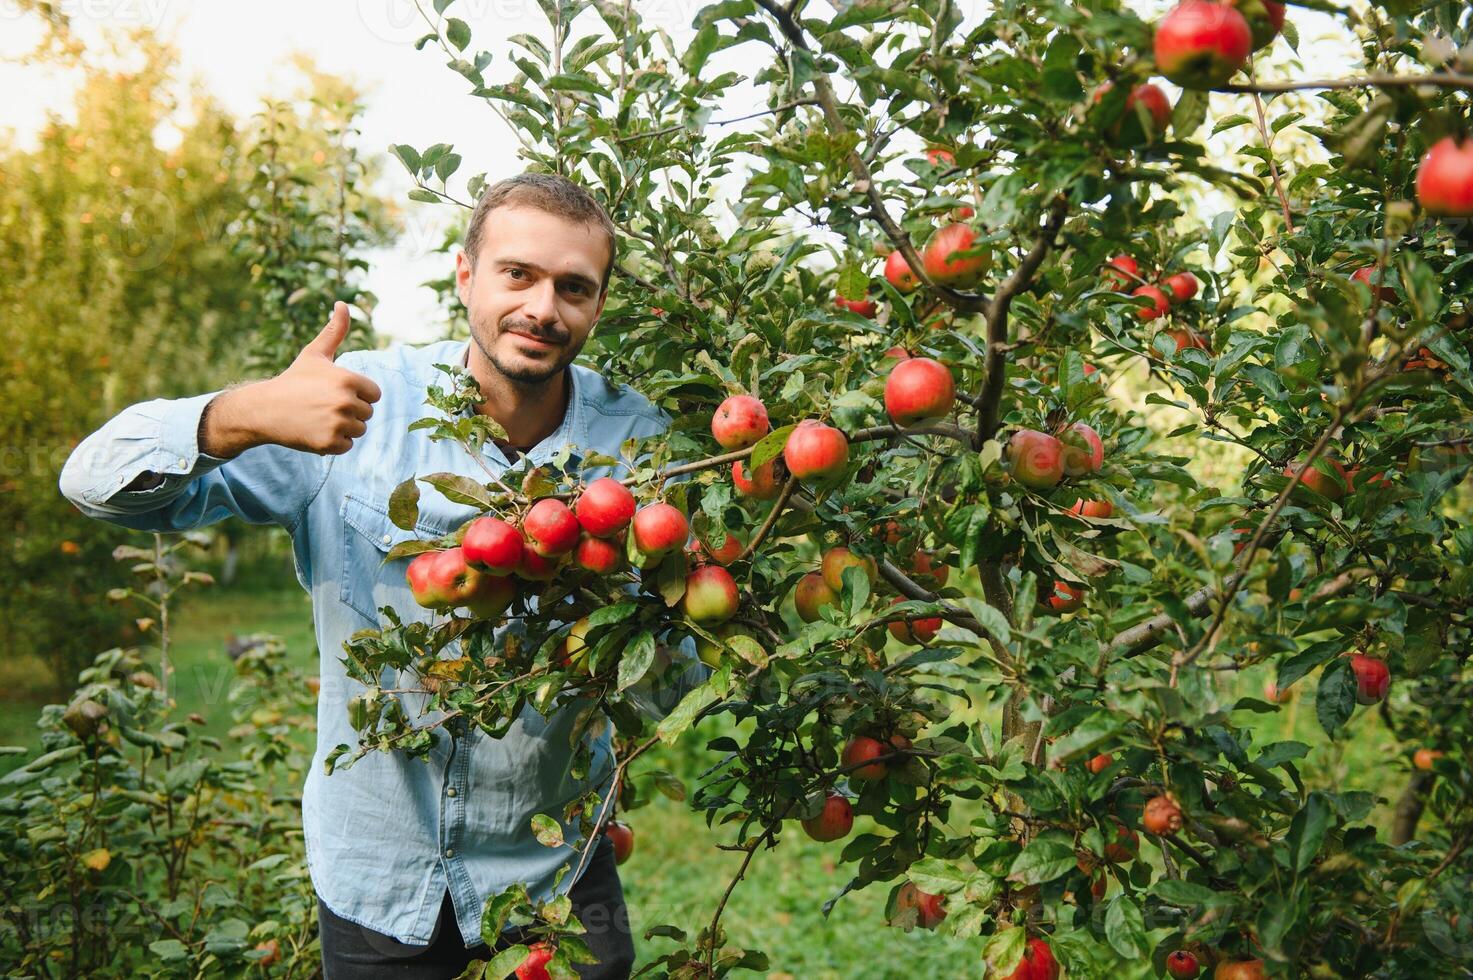 Choosing the best apples. Happy young man farmer stretching out hand to ripe apple and smiling while standing in the garden photo